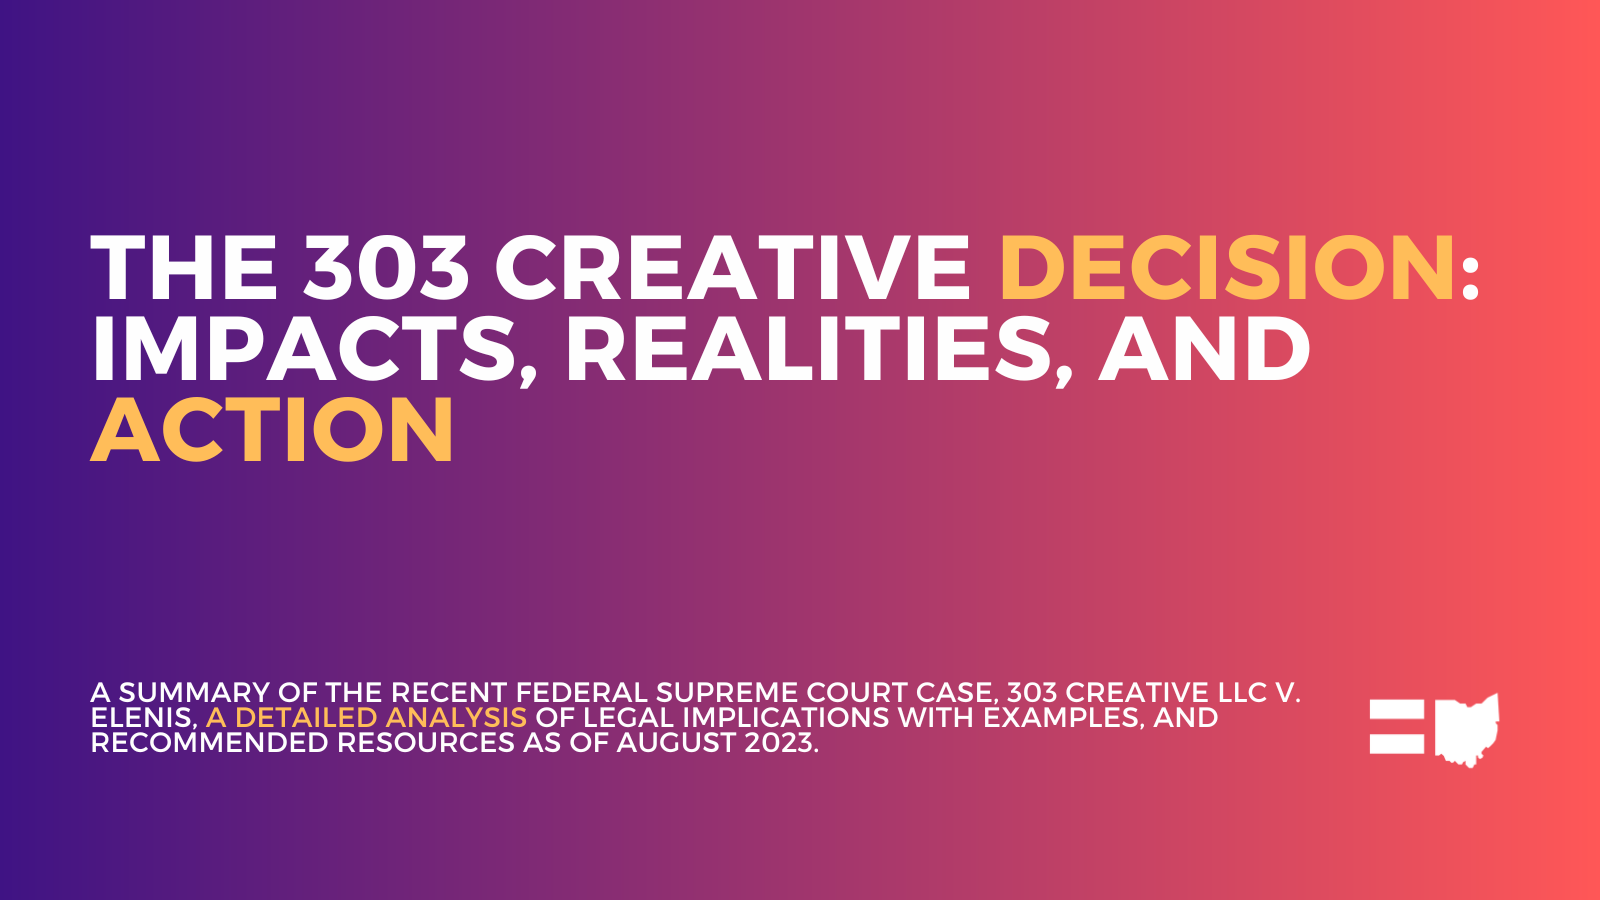 The 303 Creative Decision: Impacts, Realities, and Action - Equality Ohio